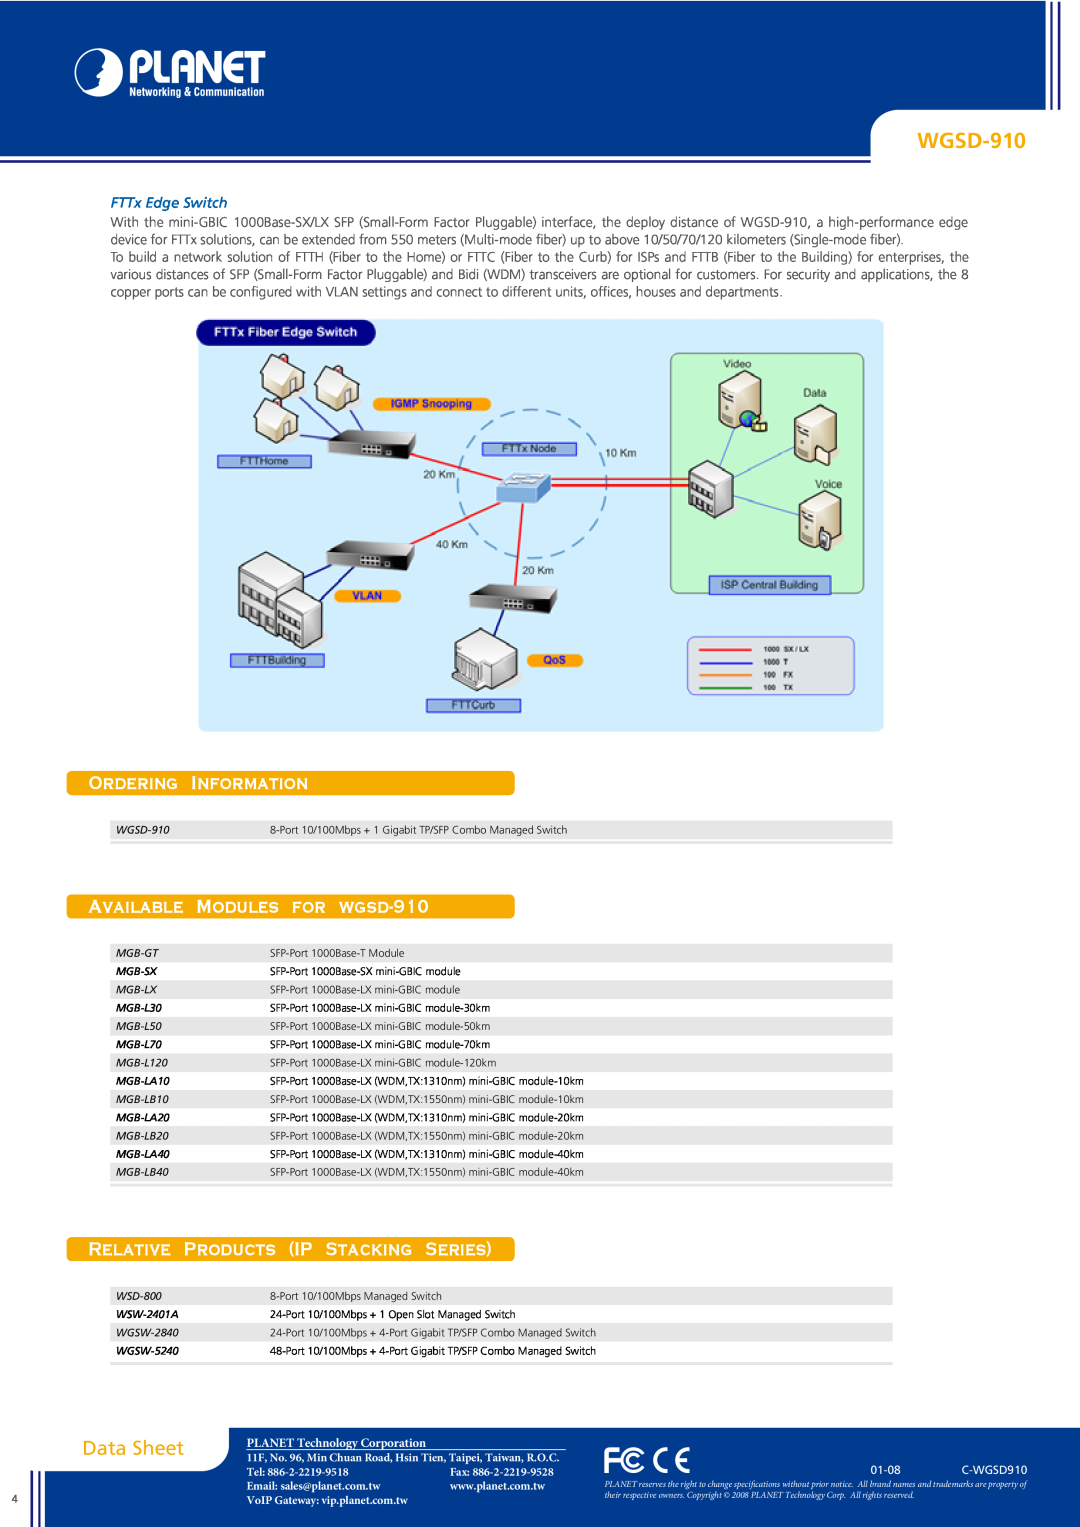 Planet Technology WGSD-910 manual Relative Products Ip Stacking Series, FTTx Edge Switch, Data Sheet, Information, Ordering 